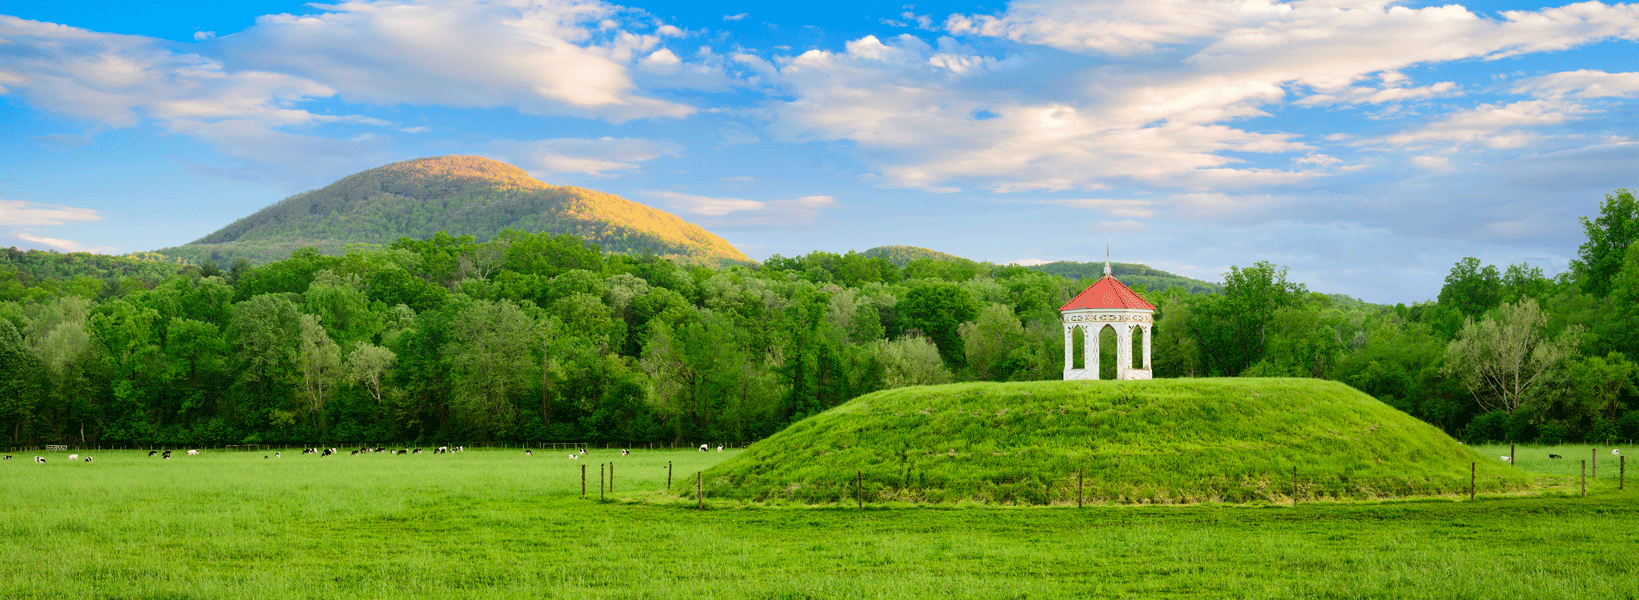 The iconic Indian Mound at Hardman Farm outside the town of Alpine Helen.